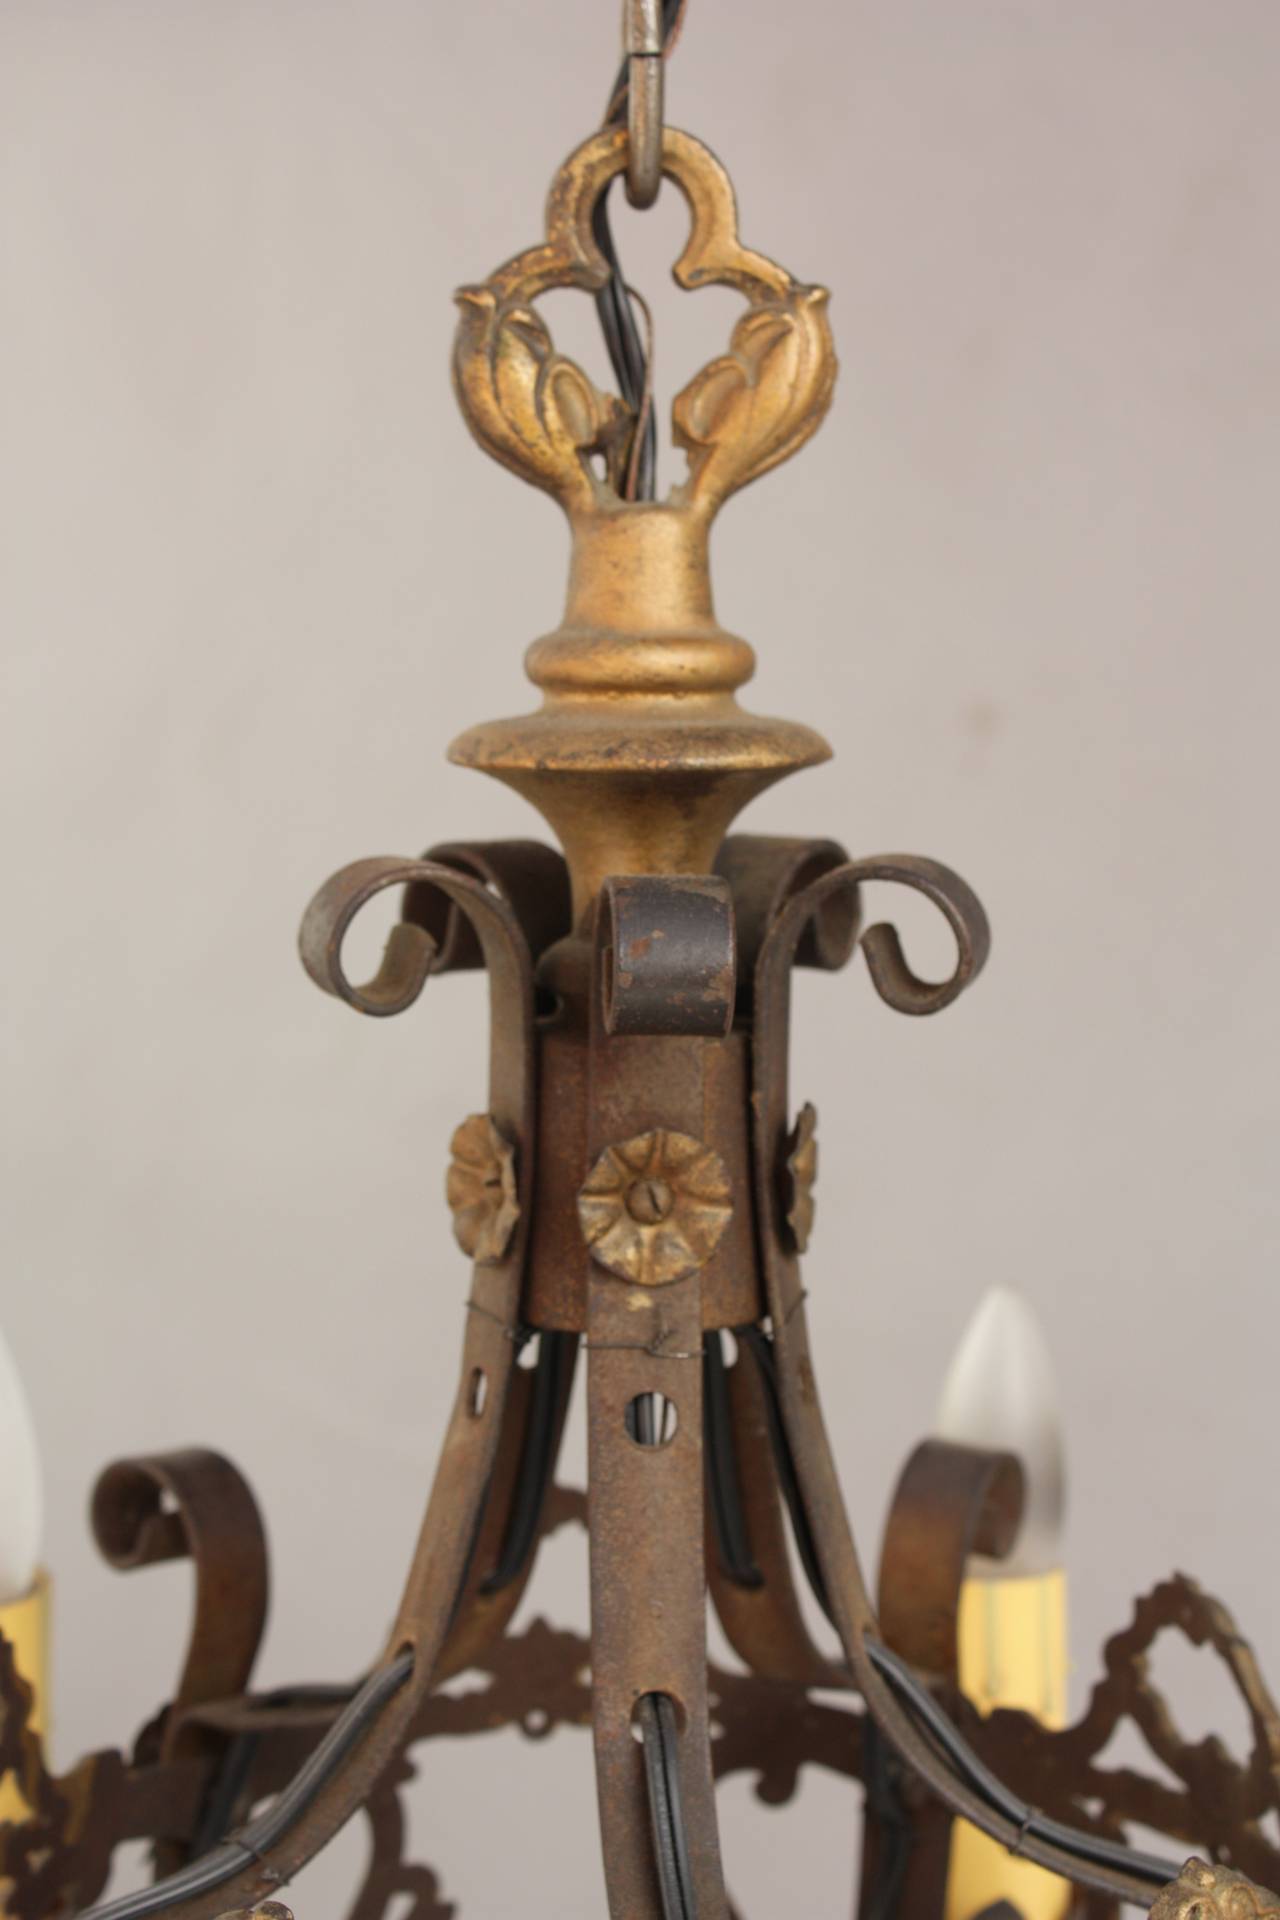 Vintage 1920s Chandelier with Acanthus Details In Good Condition For Sale In Pasadena, CA